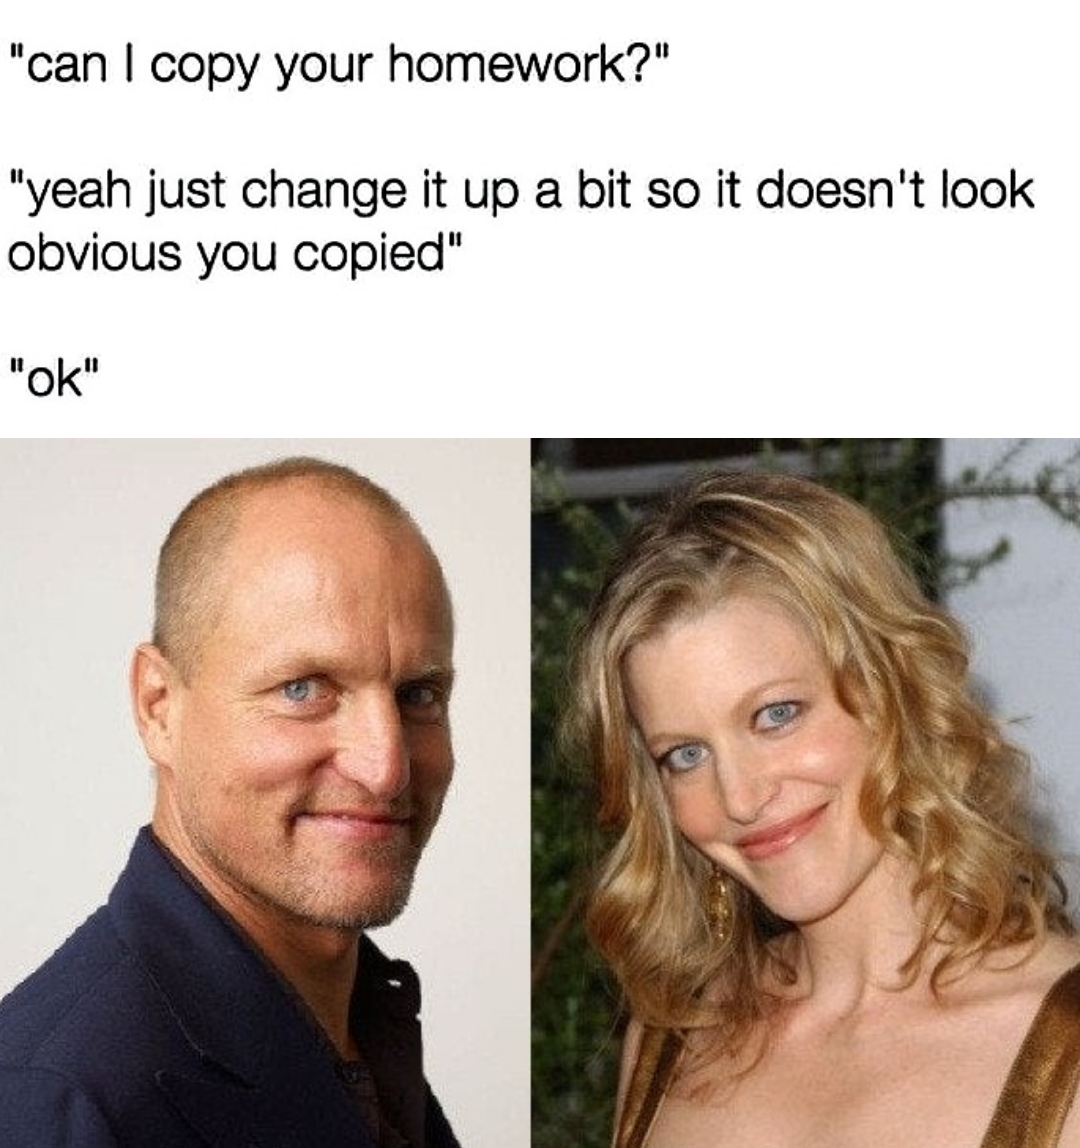 funny memes and pics - anna gunn and woody harrelson - "can I copy your homework?" "yeah just change it up a bit so it doesn't look obvious you copied" "ok"